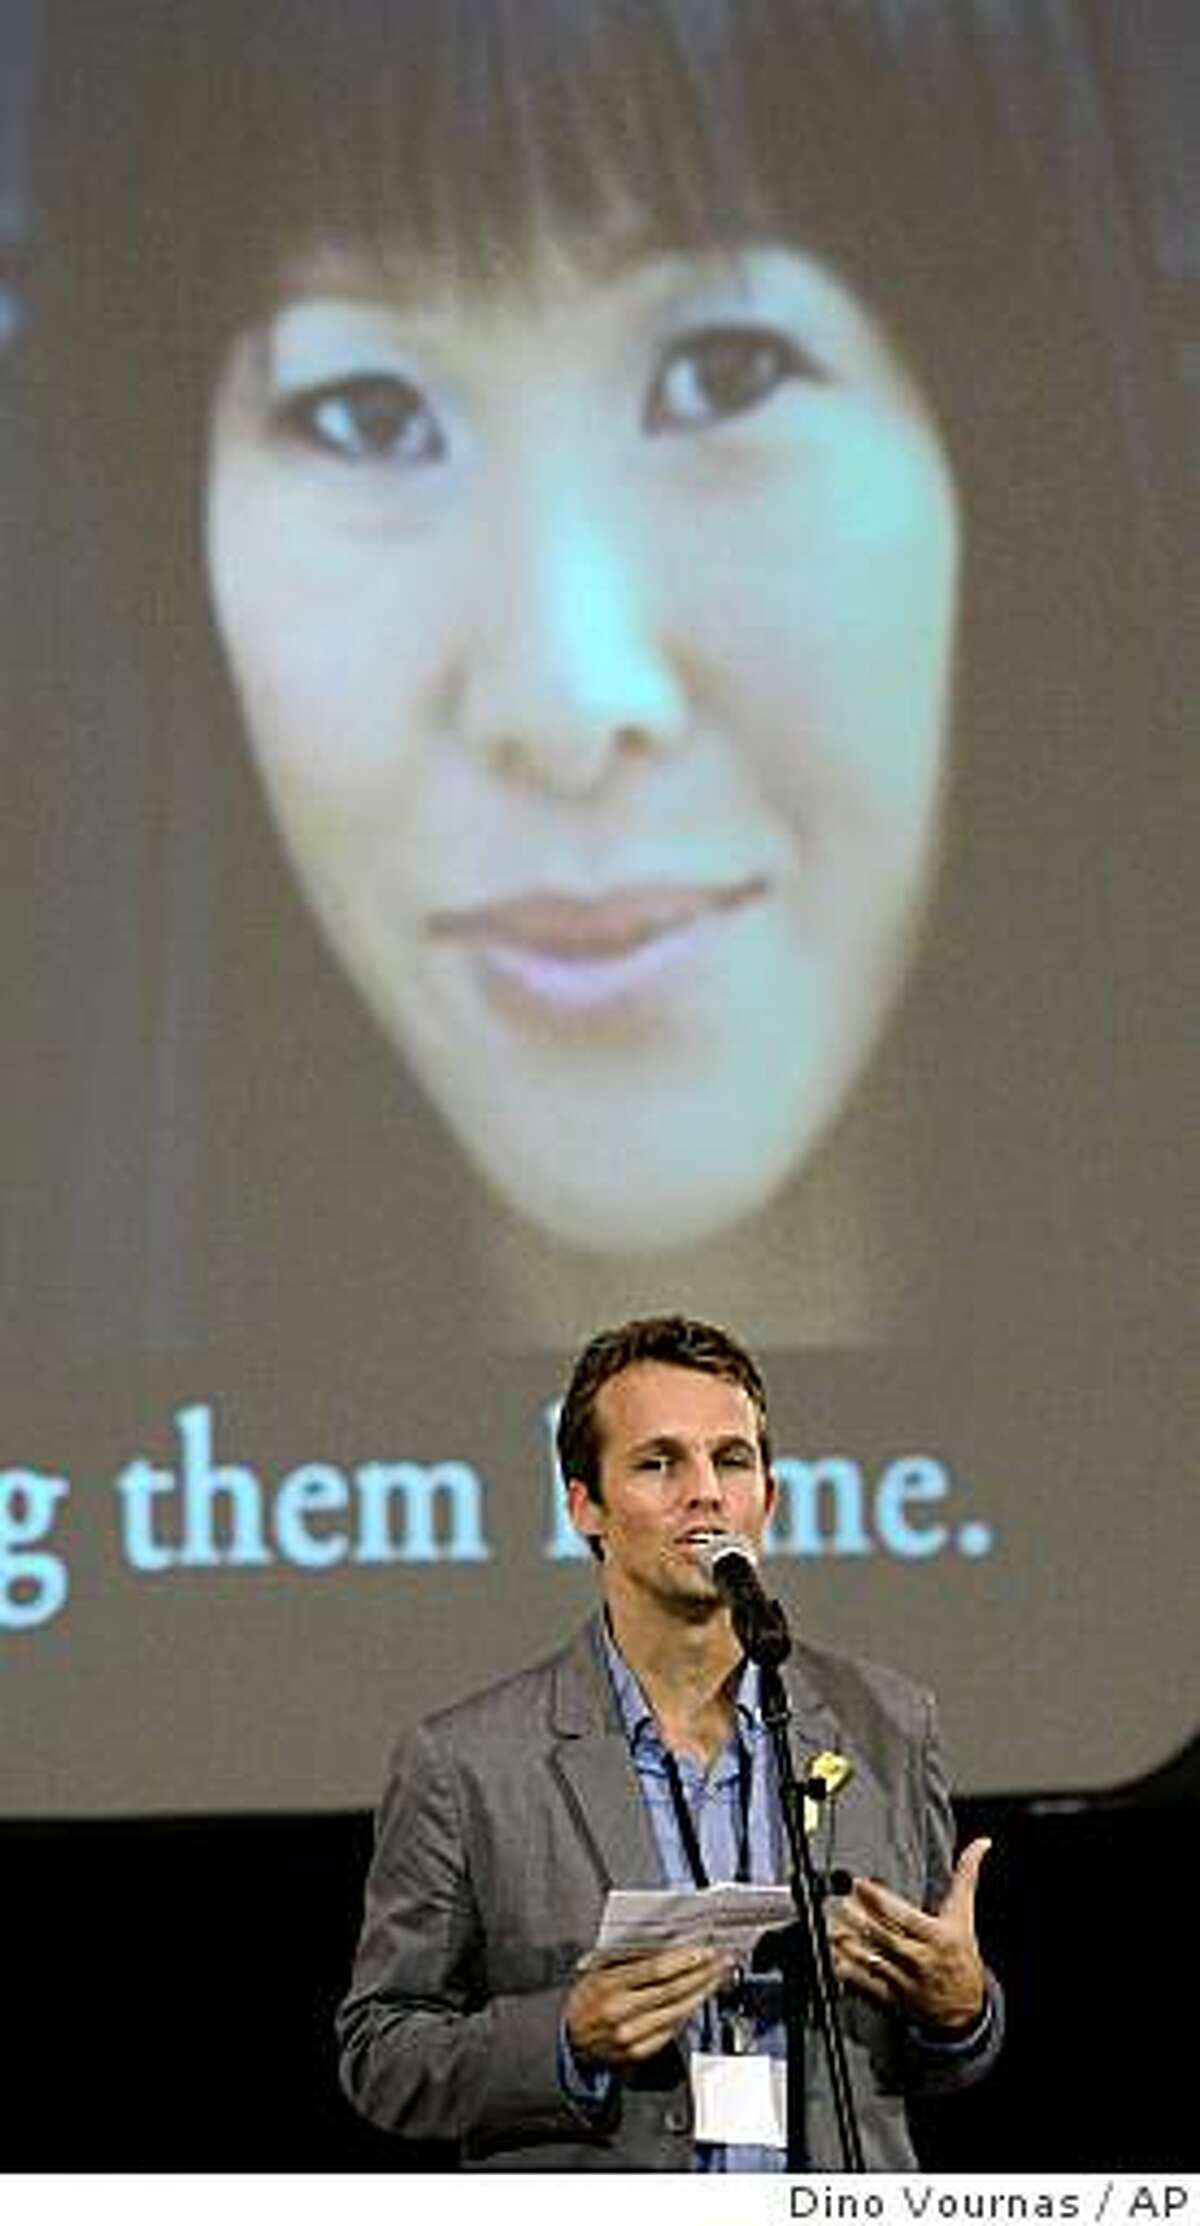 Iain Clayton, husband of Laura Ling (on screen), speaks to the crowd at the Academy of Art University during a vigil for the two journalists held by North Korea, Wednesday, June 24, 2009 in San Francisco. (AP Photo/Dino Vournas)